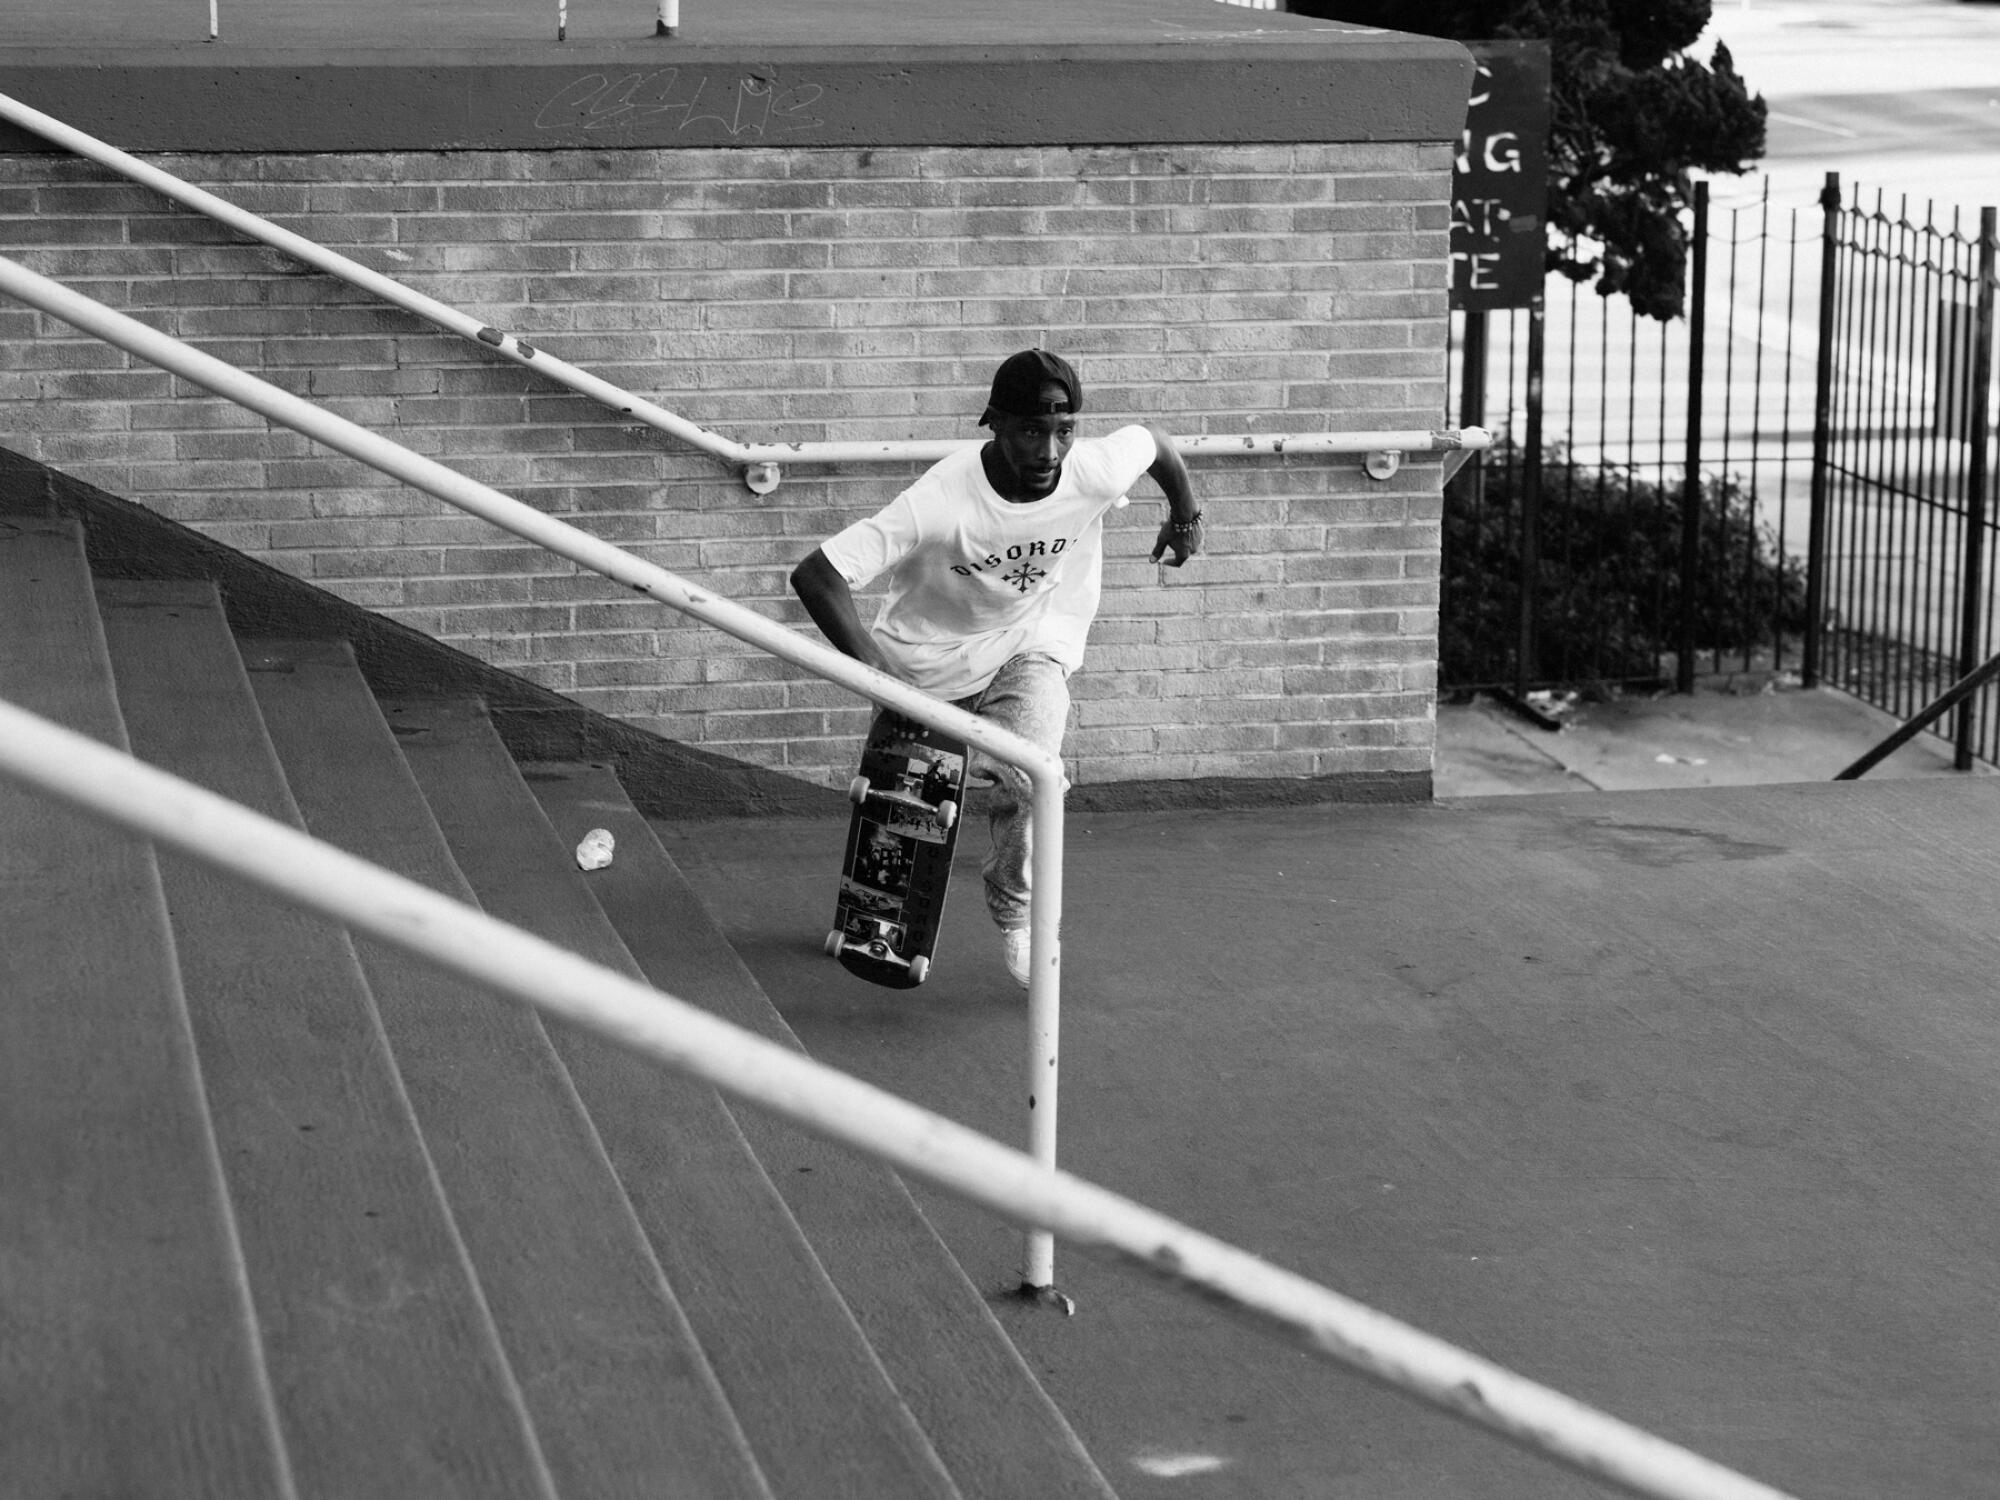 KIDS SKATE HOLLYWOOD HIGH 16 STAIR - A DAY WITH NKA - 